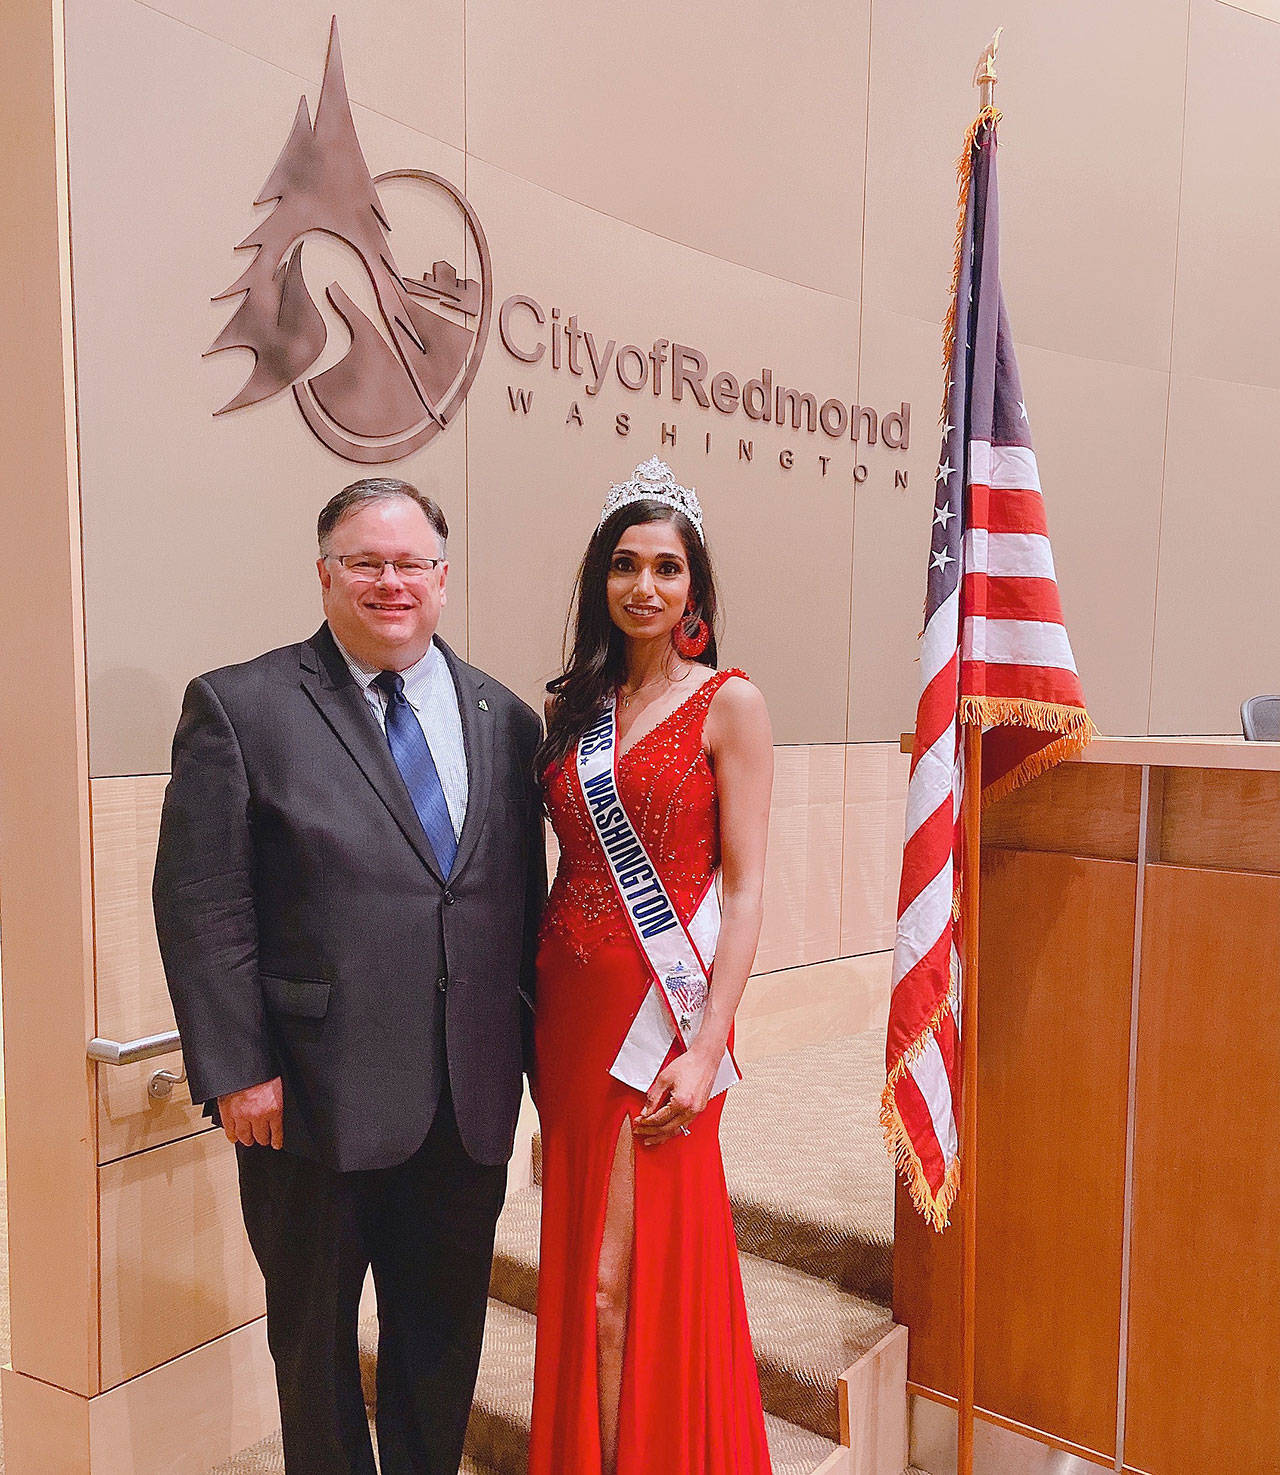 Mayor John Marchione and Neelam Chahlia at the council meeting on Nov. 19. Photo courtesy of Neelam Chahlia